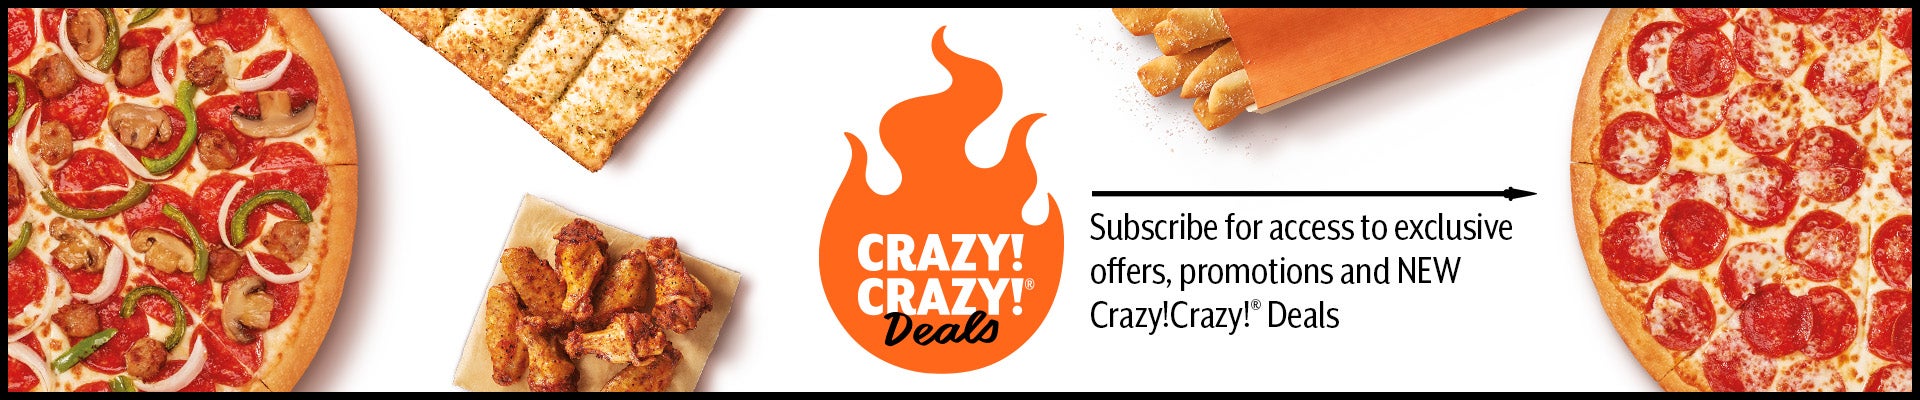 Crazy! Crazy! Deals   Subscribe for access to exclusive offers, promotions, and NEW Crazy! Crazy! Deals